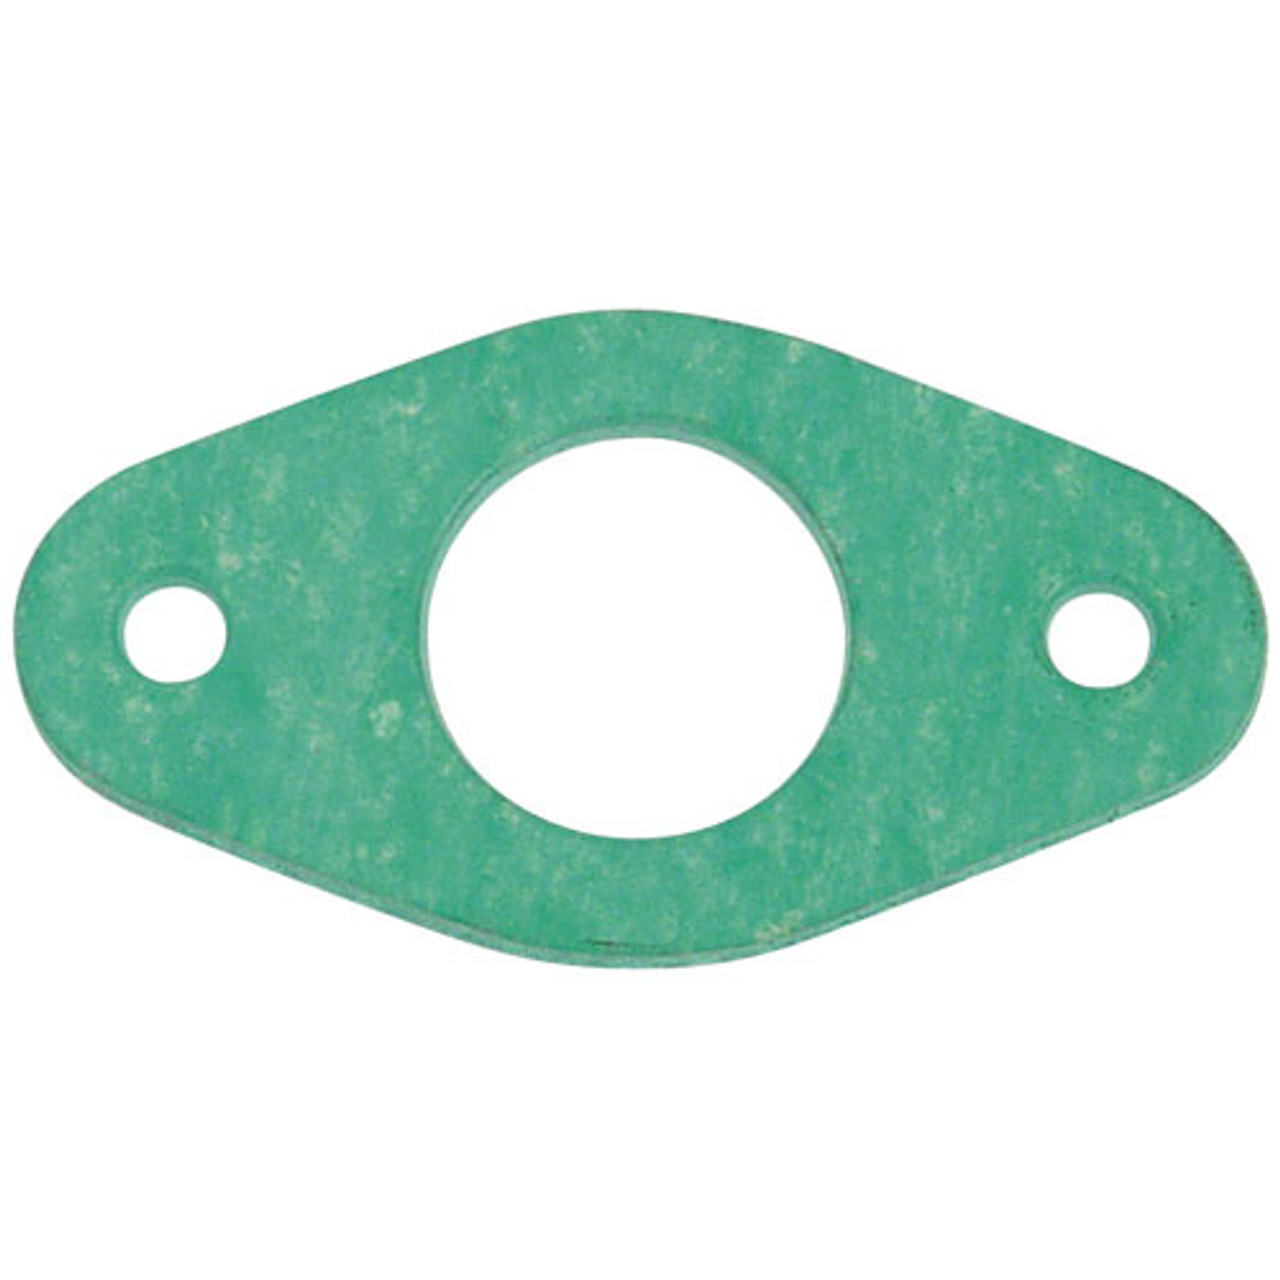 Burner Gasket 2-11/16" X 1-1/2" - Replacement Part For Rankin Delux RANRDHP09